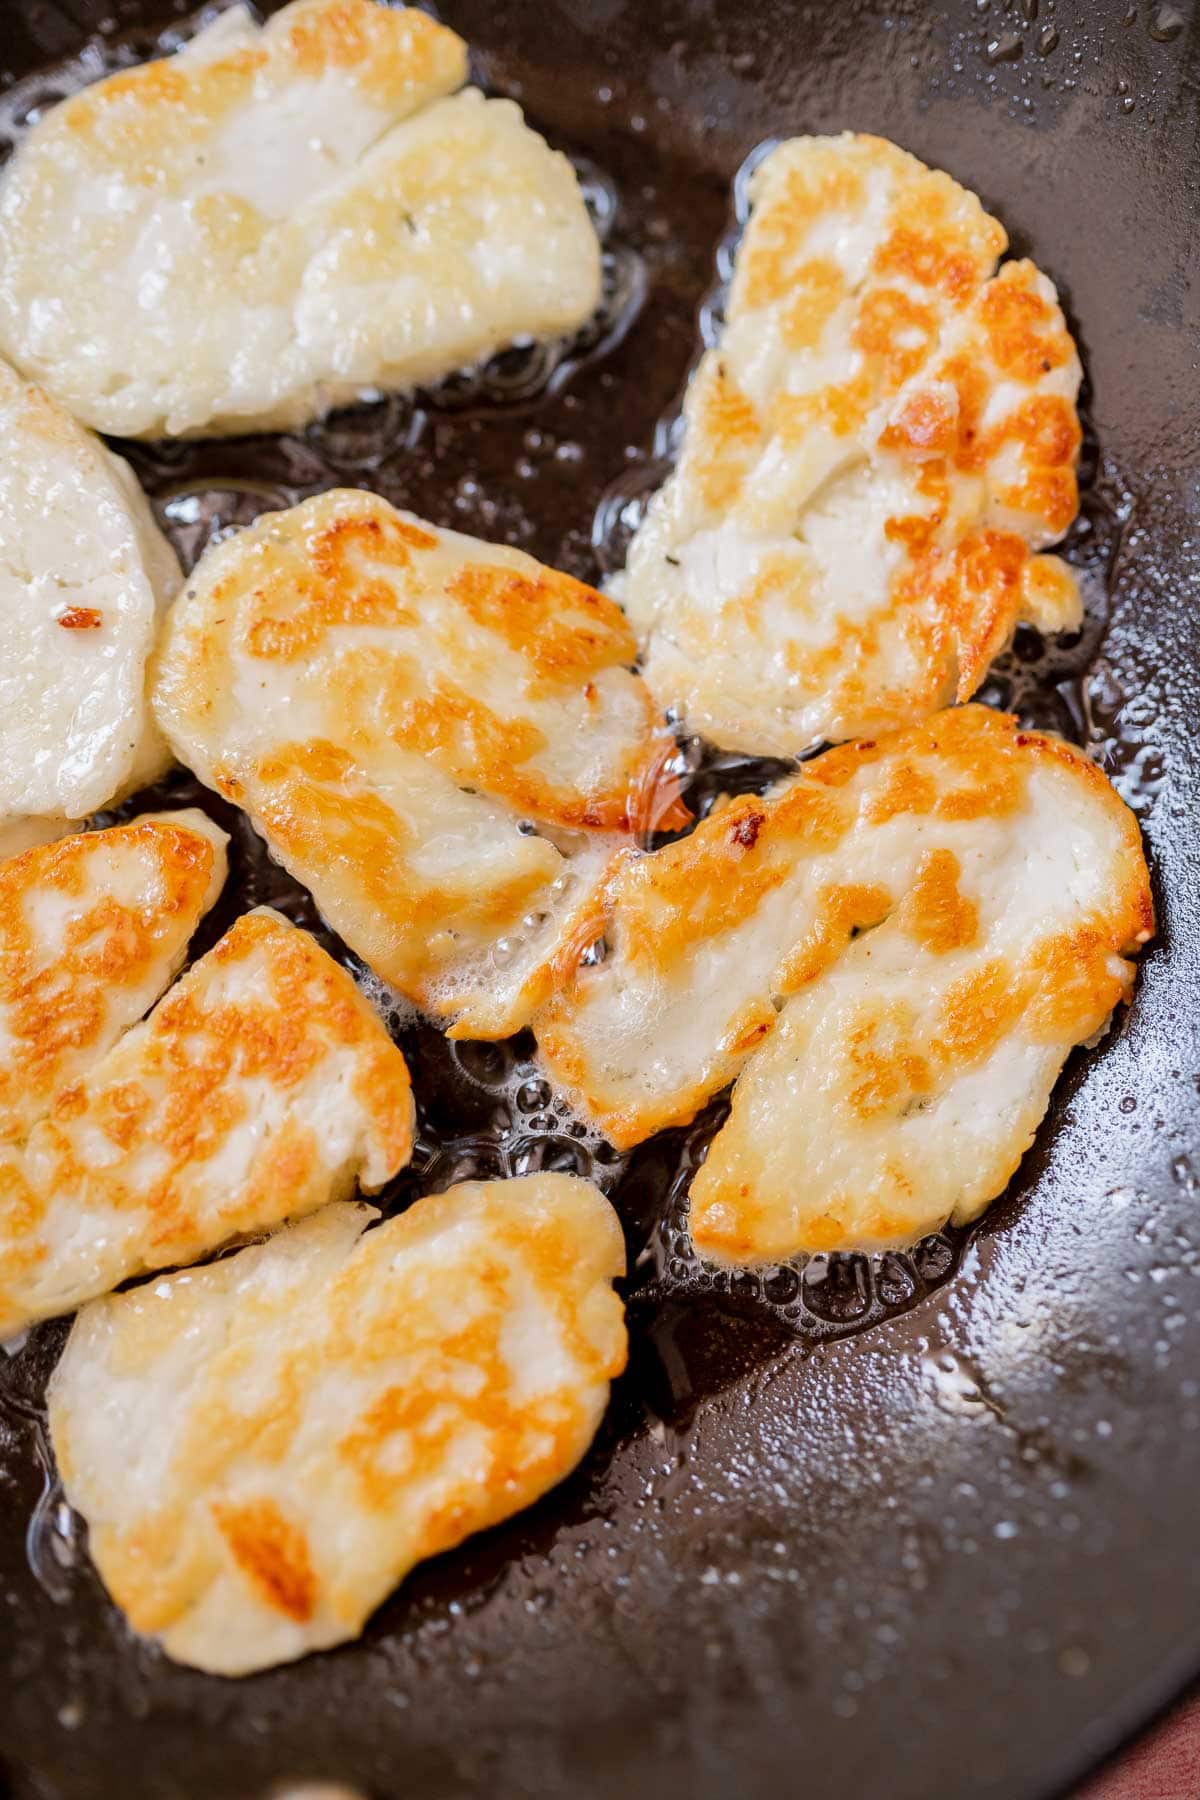 Crispy golden halloumi cheese slices resting in a black skillet.